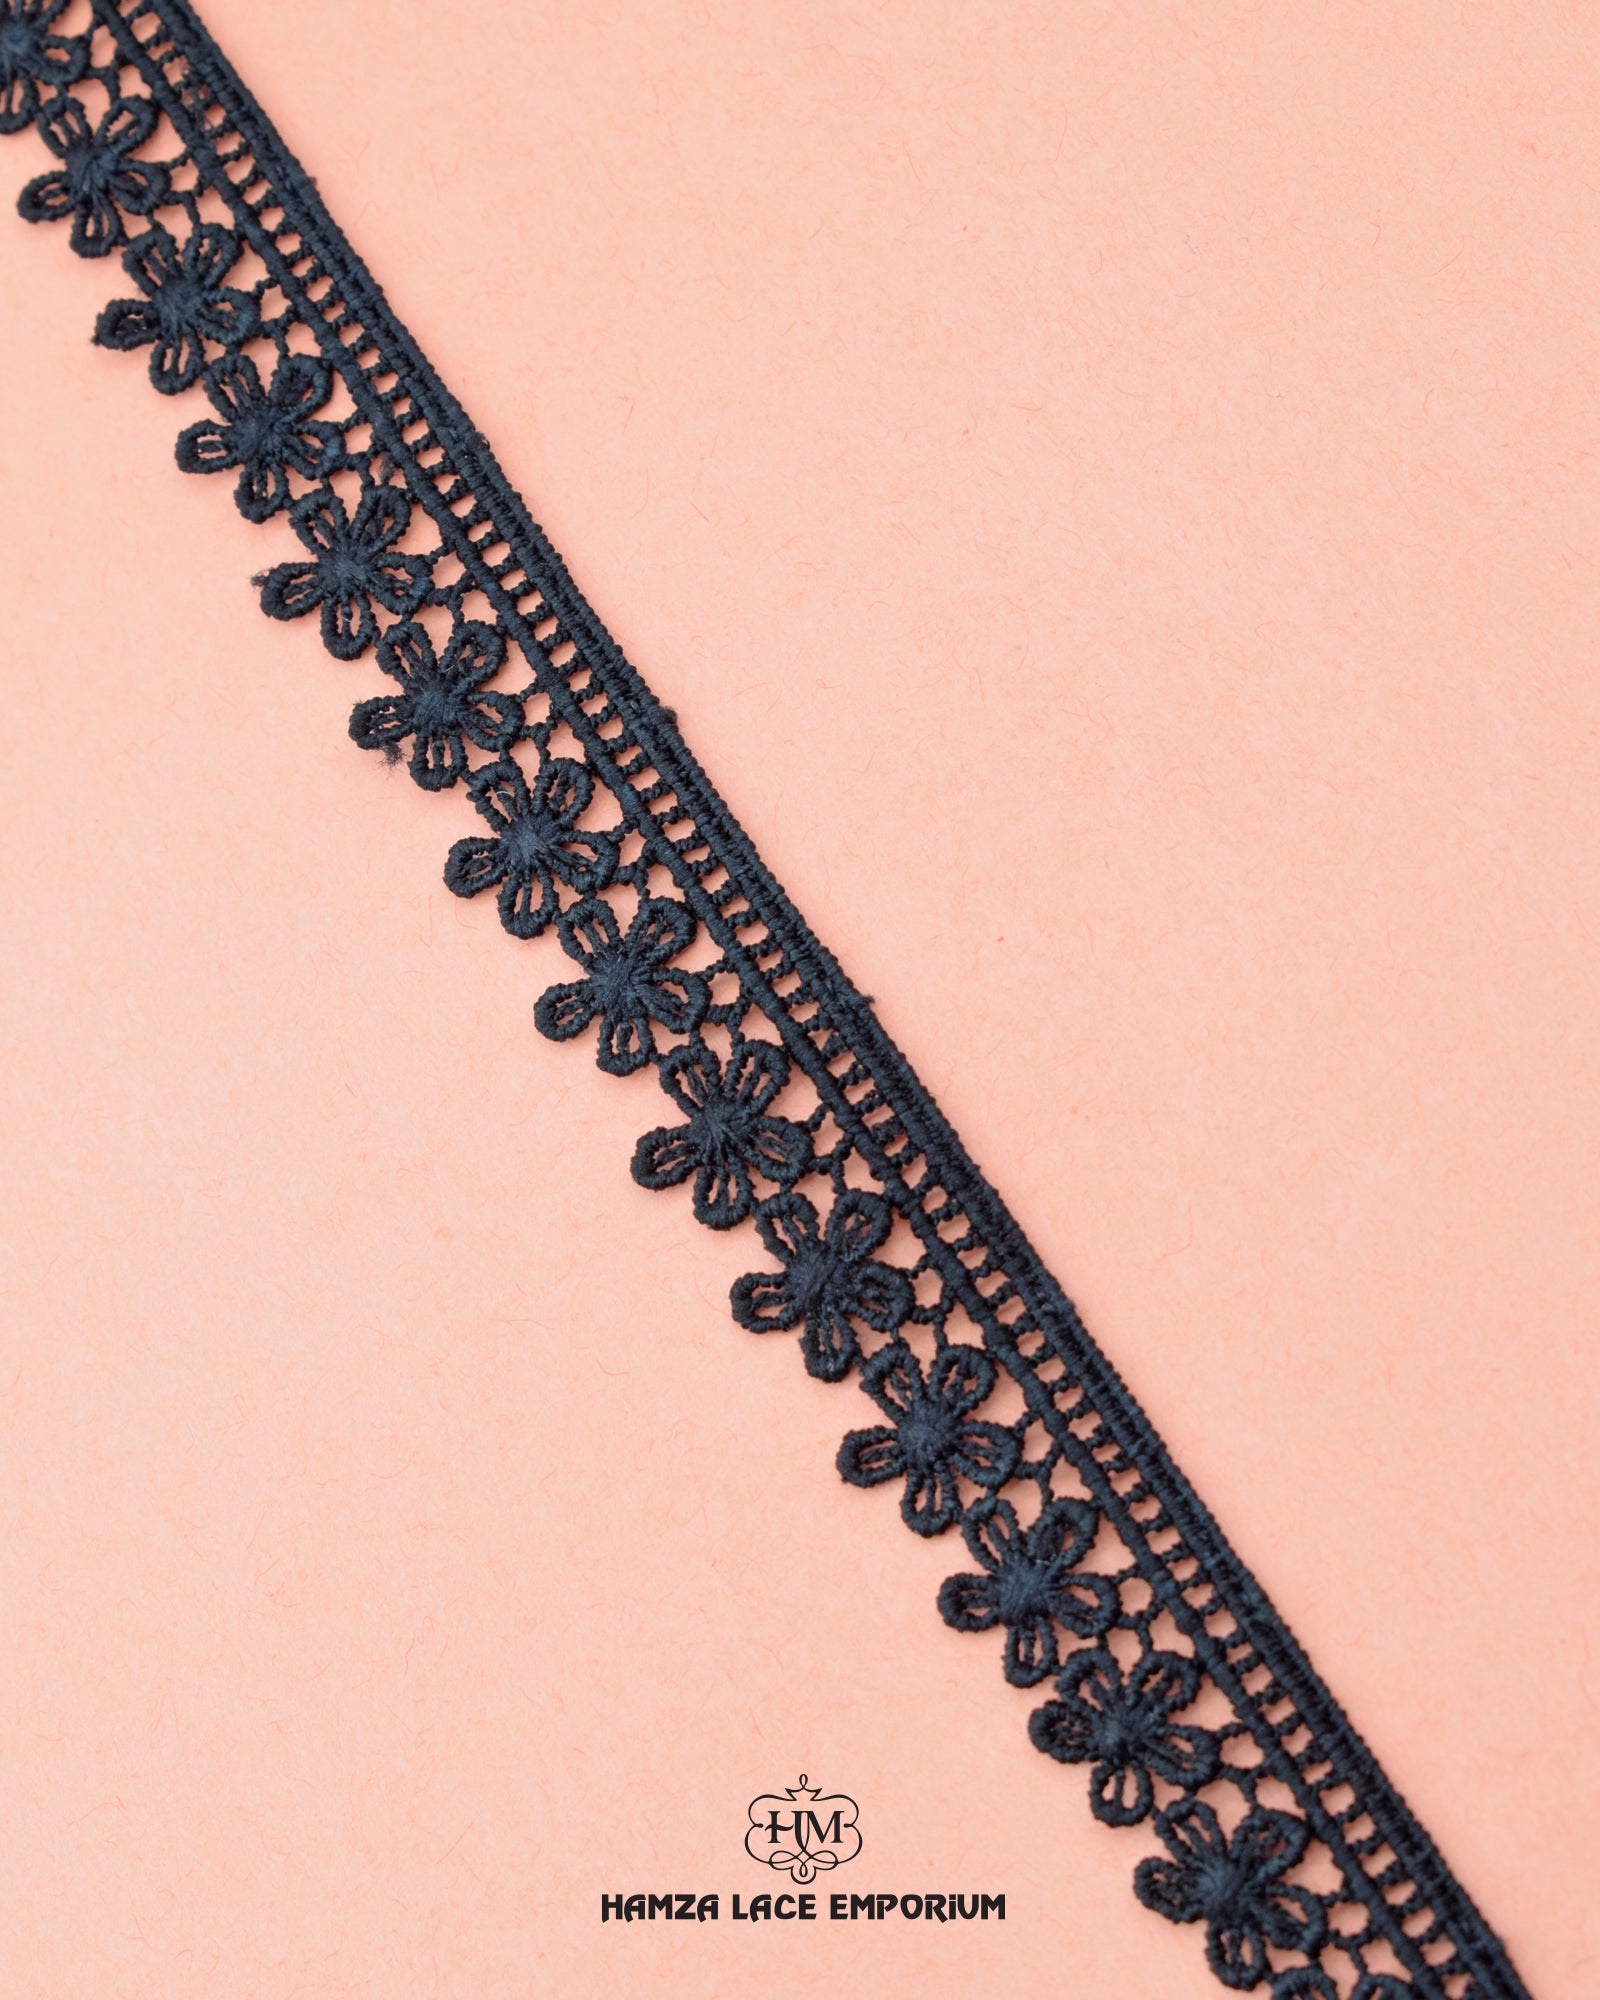 The black color product 'Edging Flower Lace 16174' is displayed with the brand name ' Hamza Lace' written at the bottom